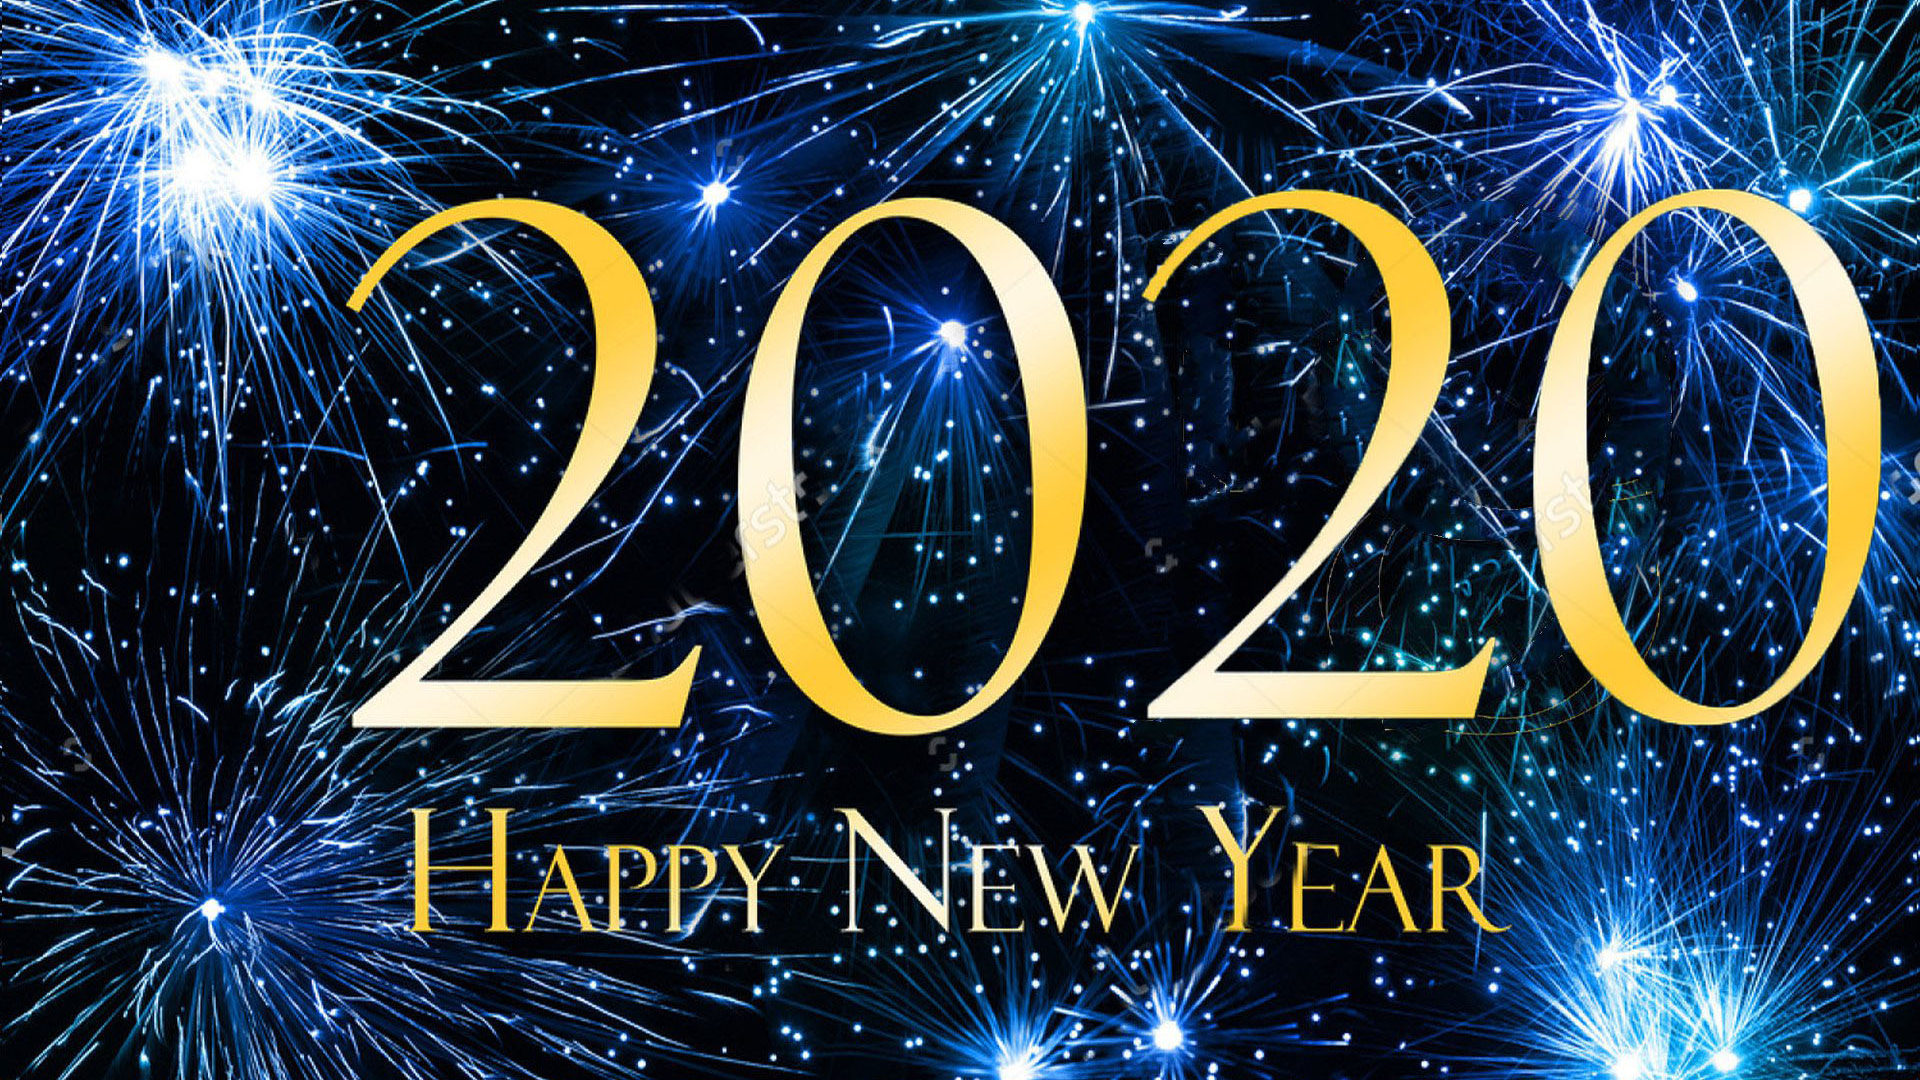 Happy New Year Blue HD Wallpaper For Laptop And Tablet